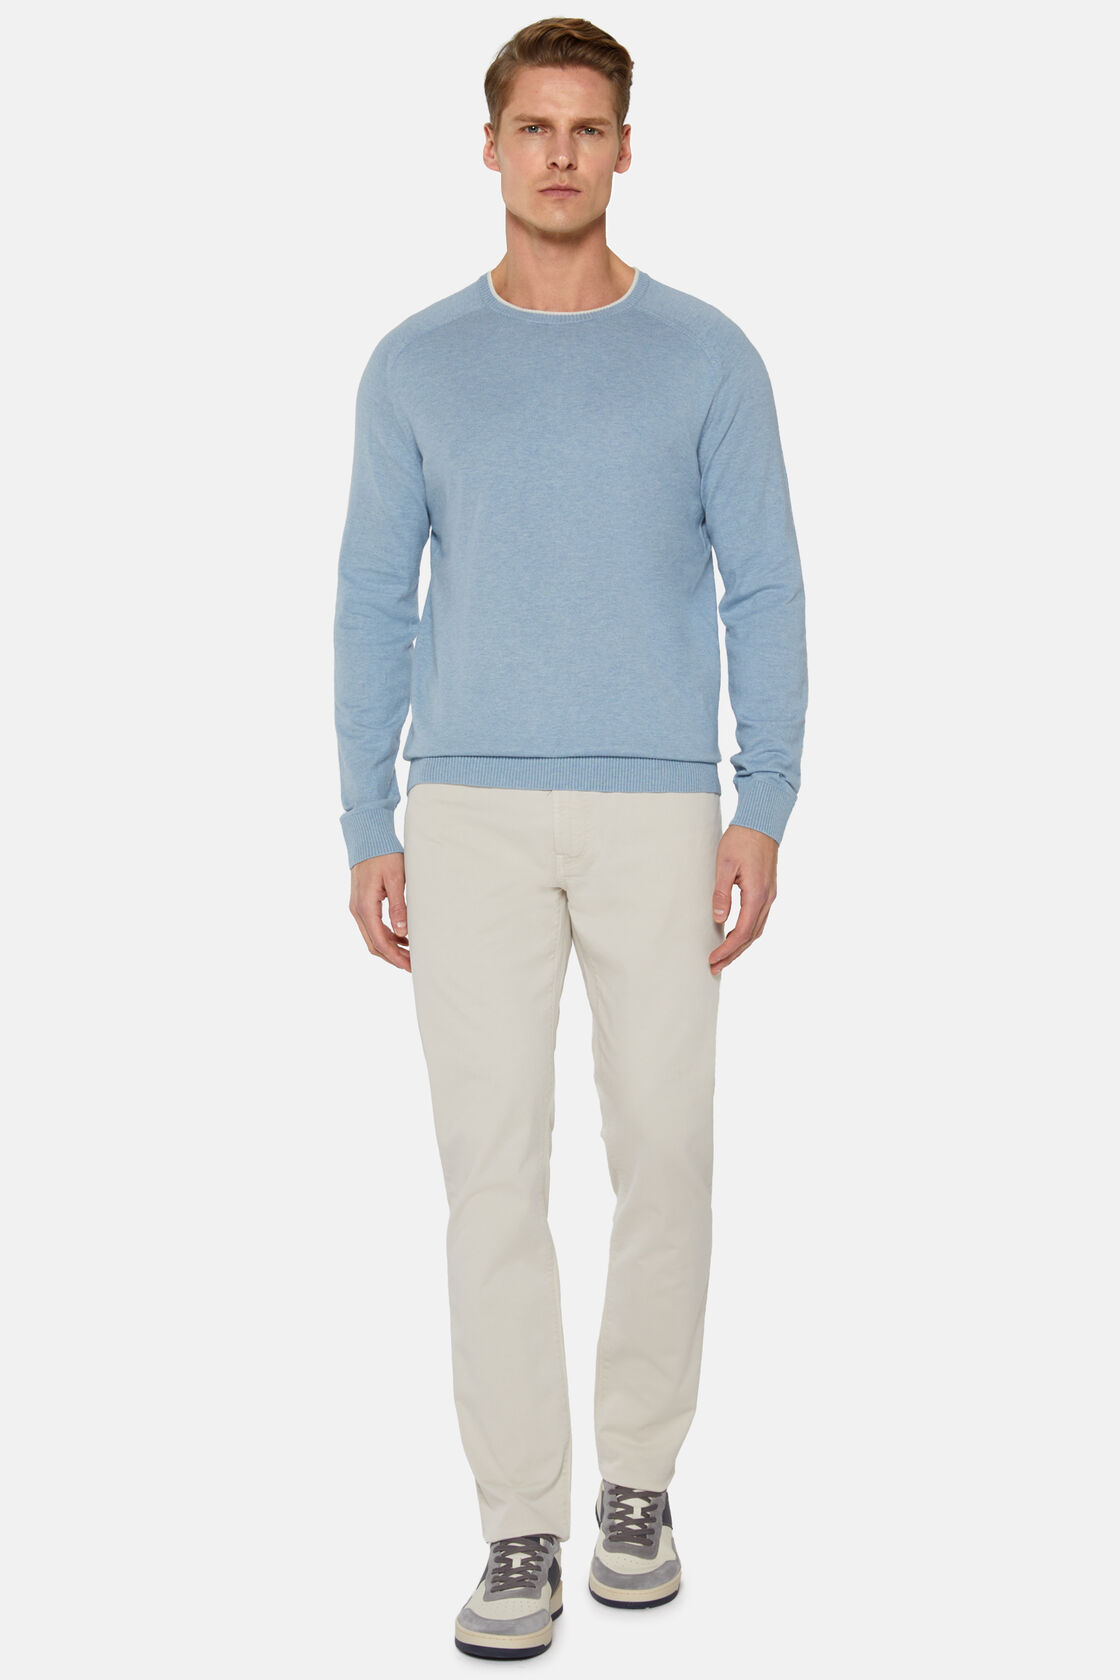 Sky Blue Crew Neck Jumper in Cotton, Silk and Cashmere, Light Blue, hi-res